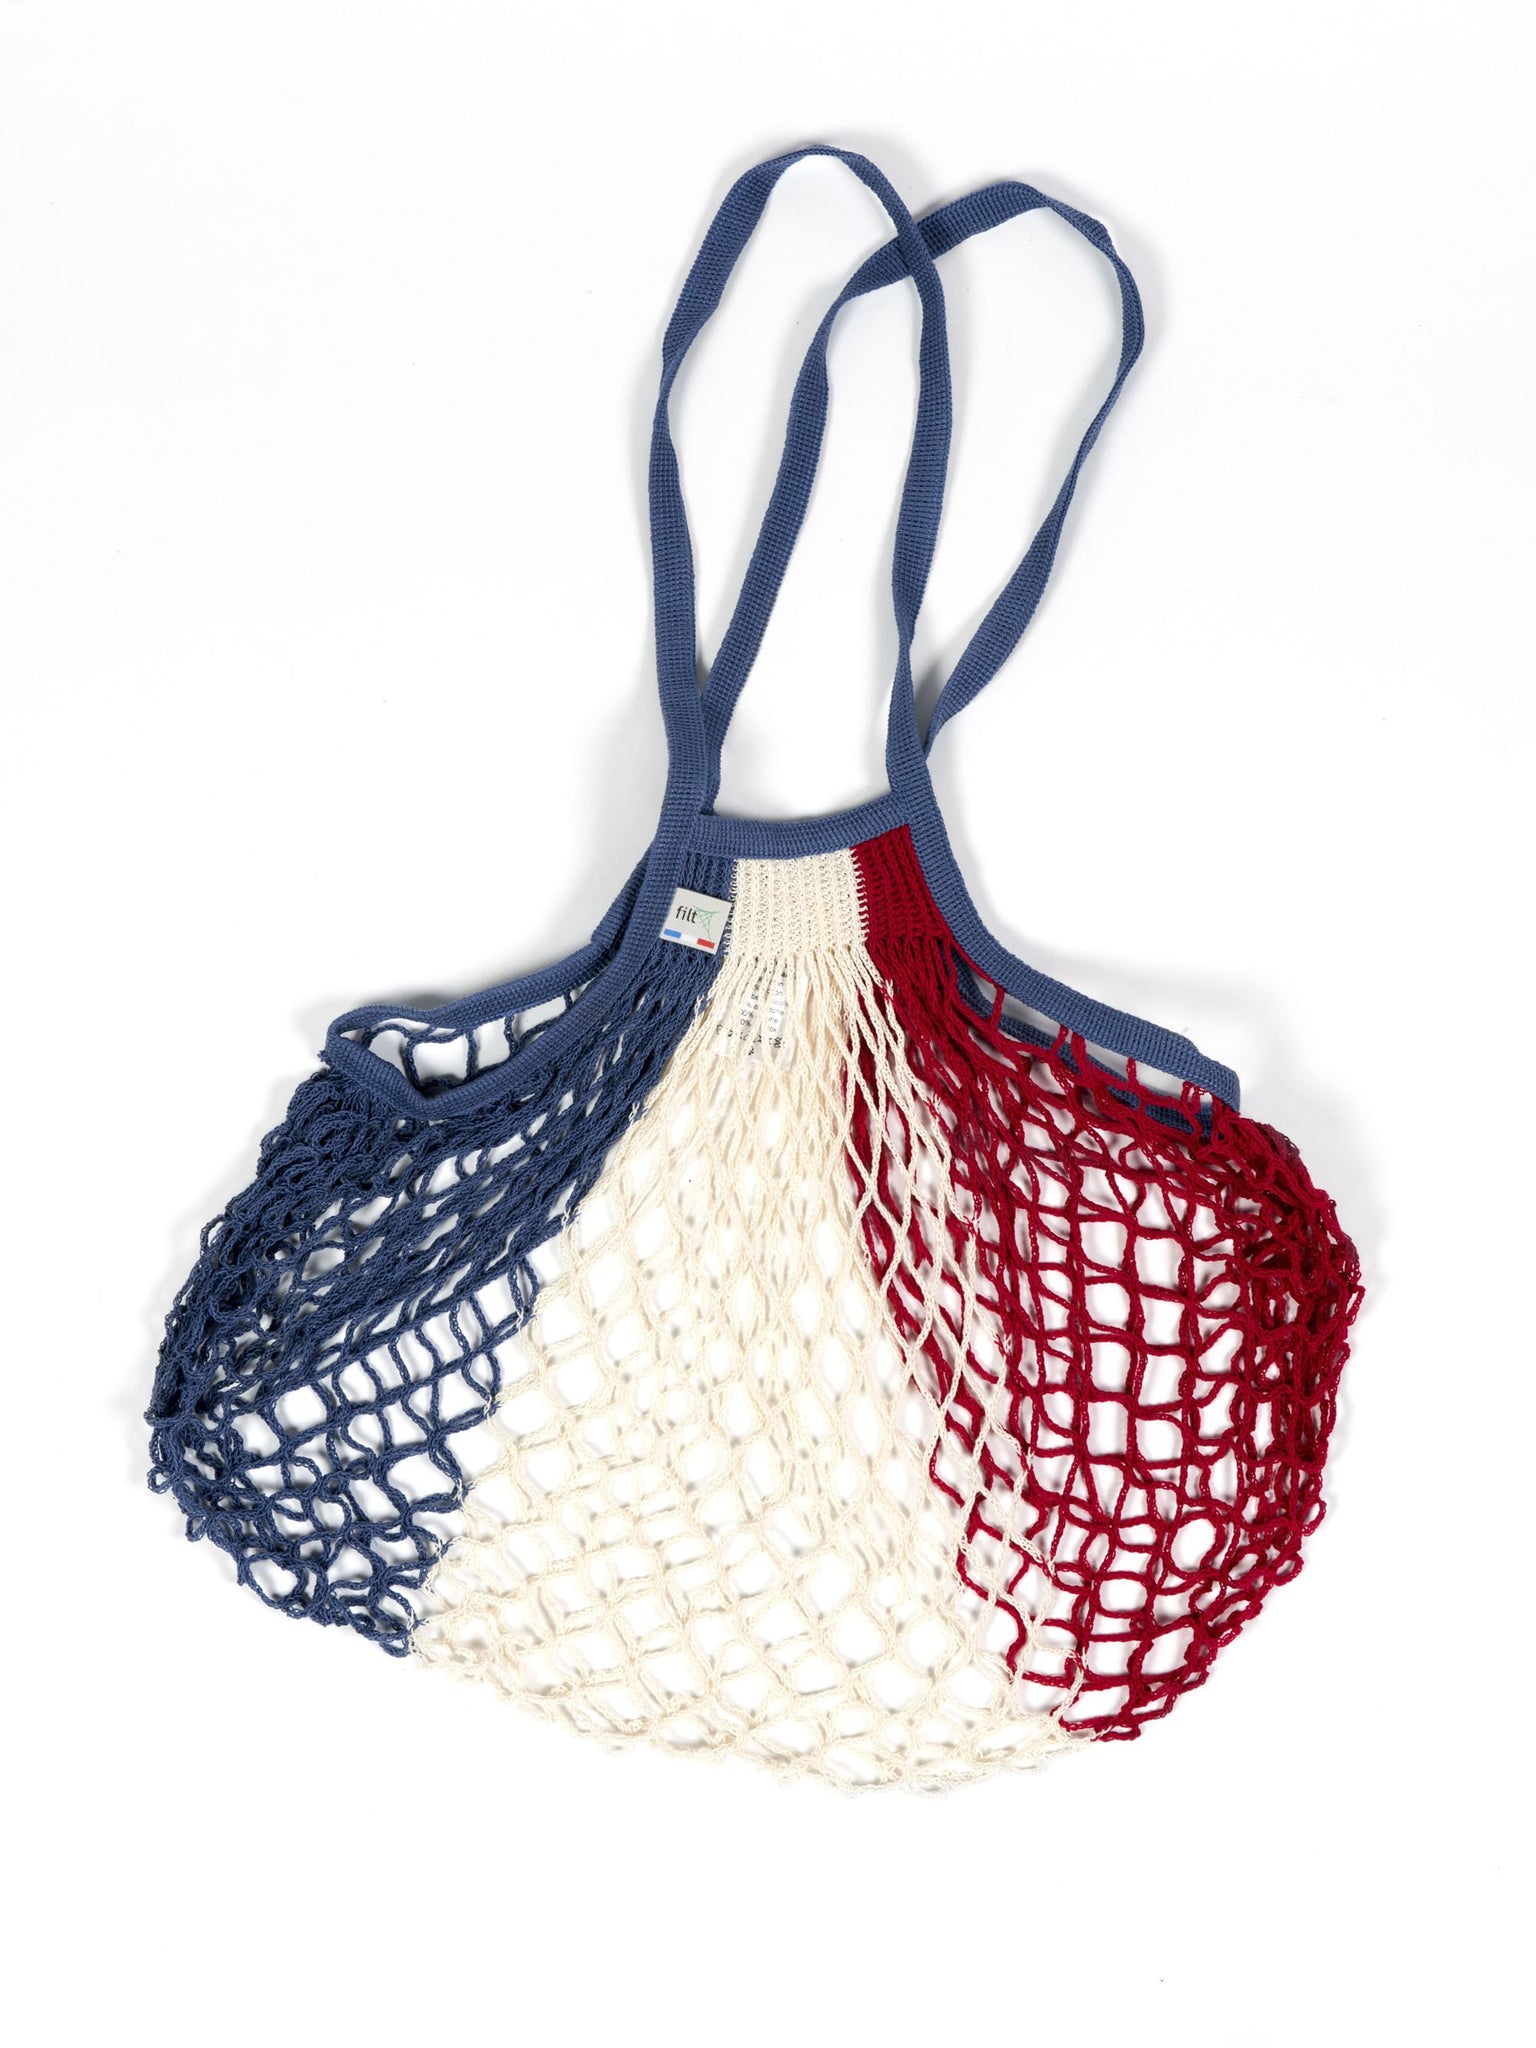 Filt French Market Tote Bag Medium in Red, White & Blue